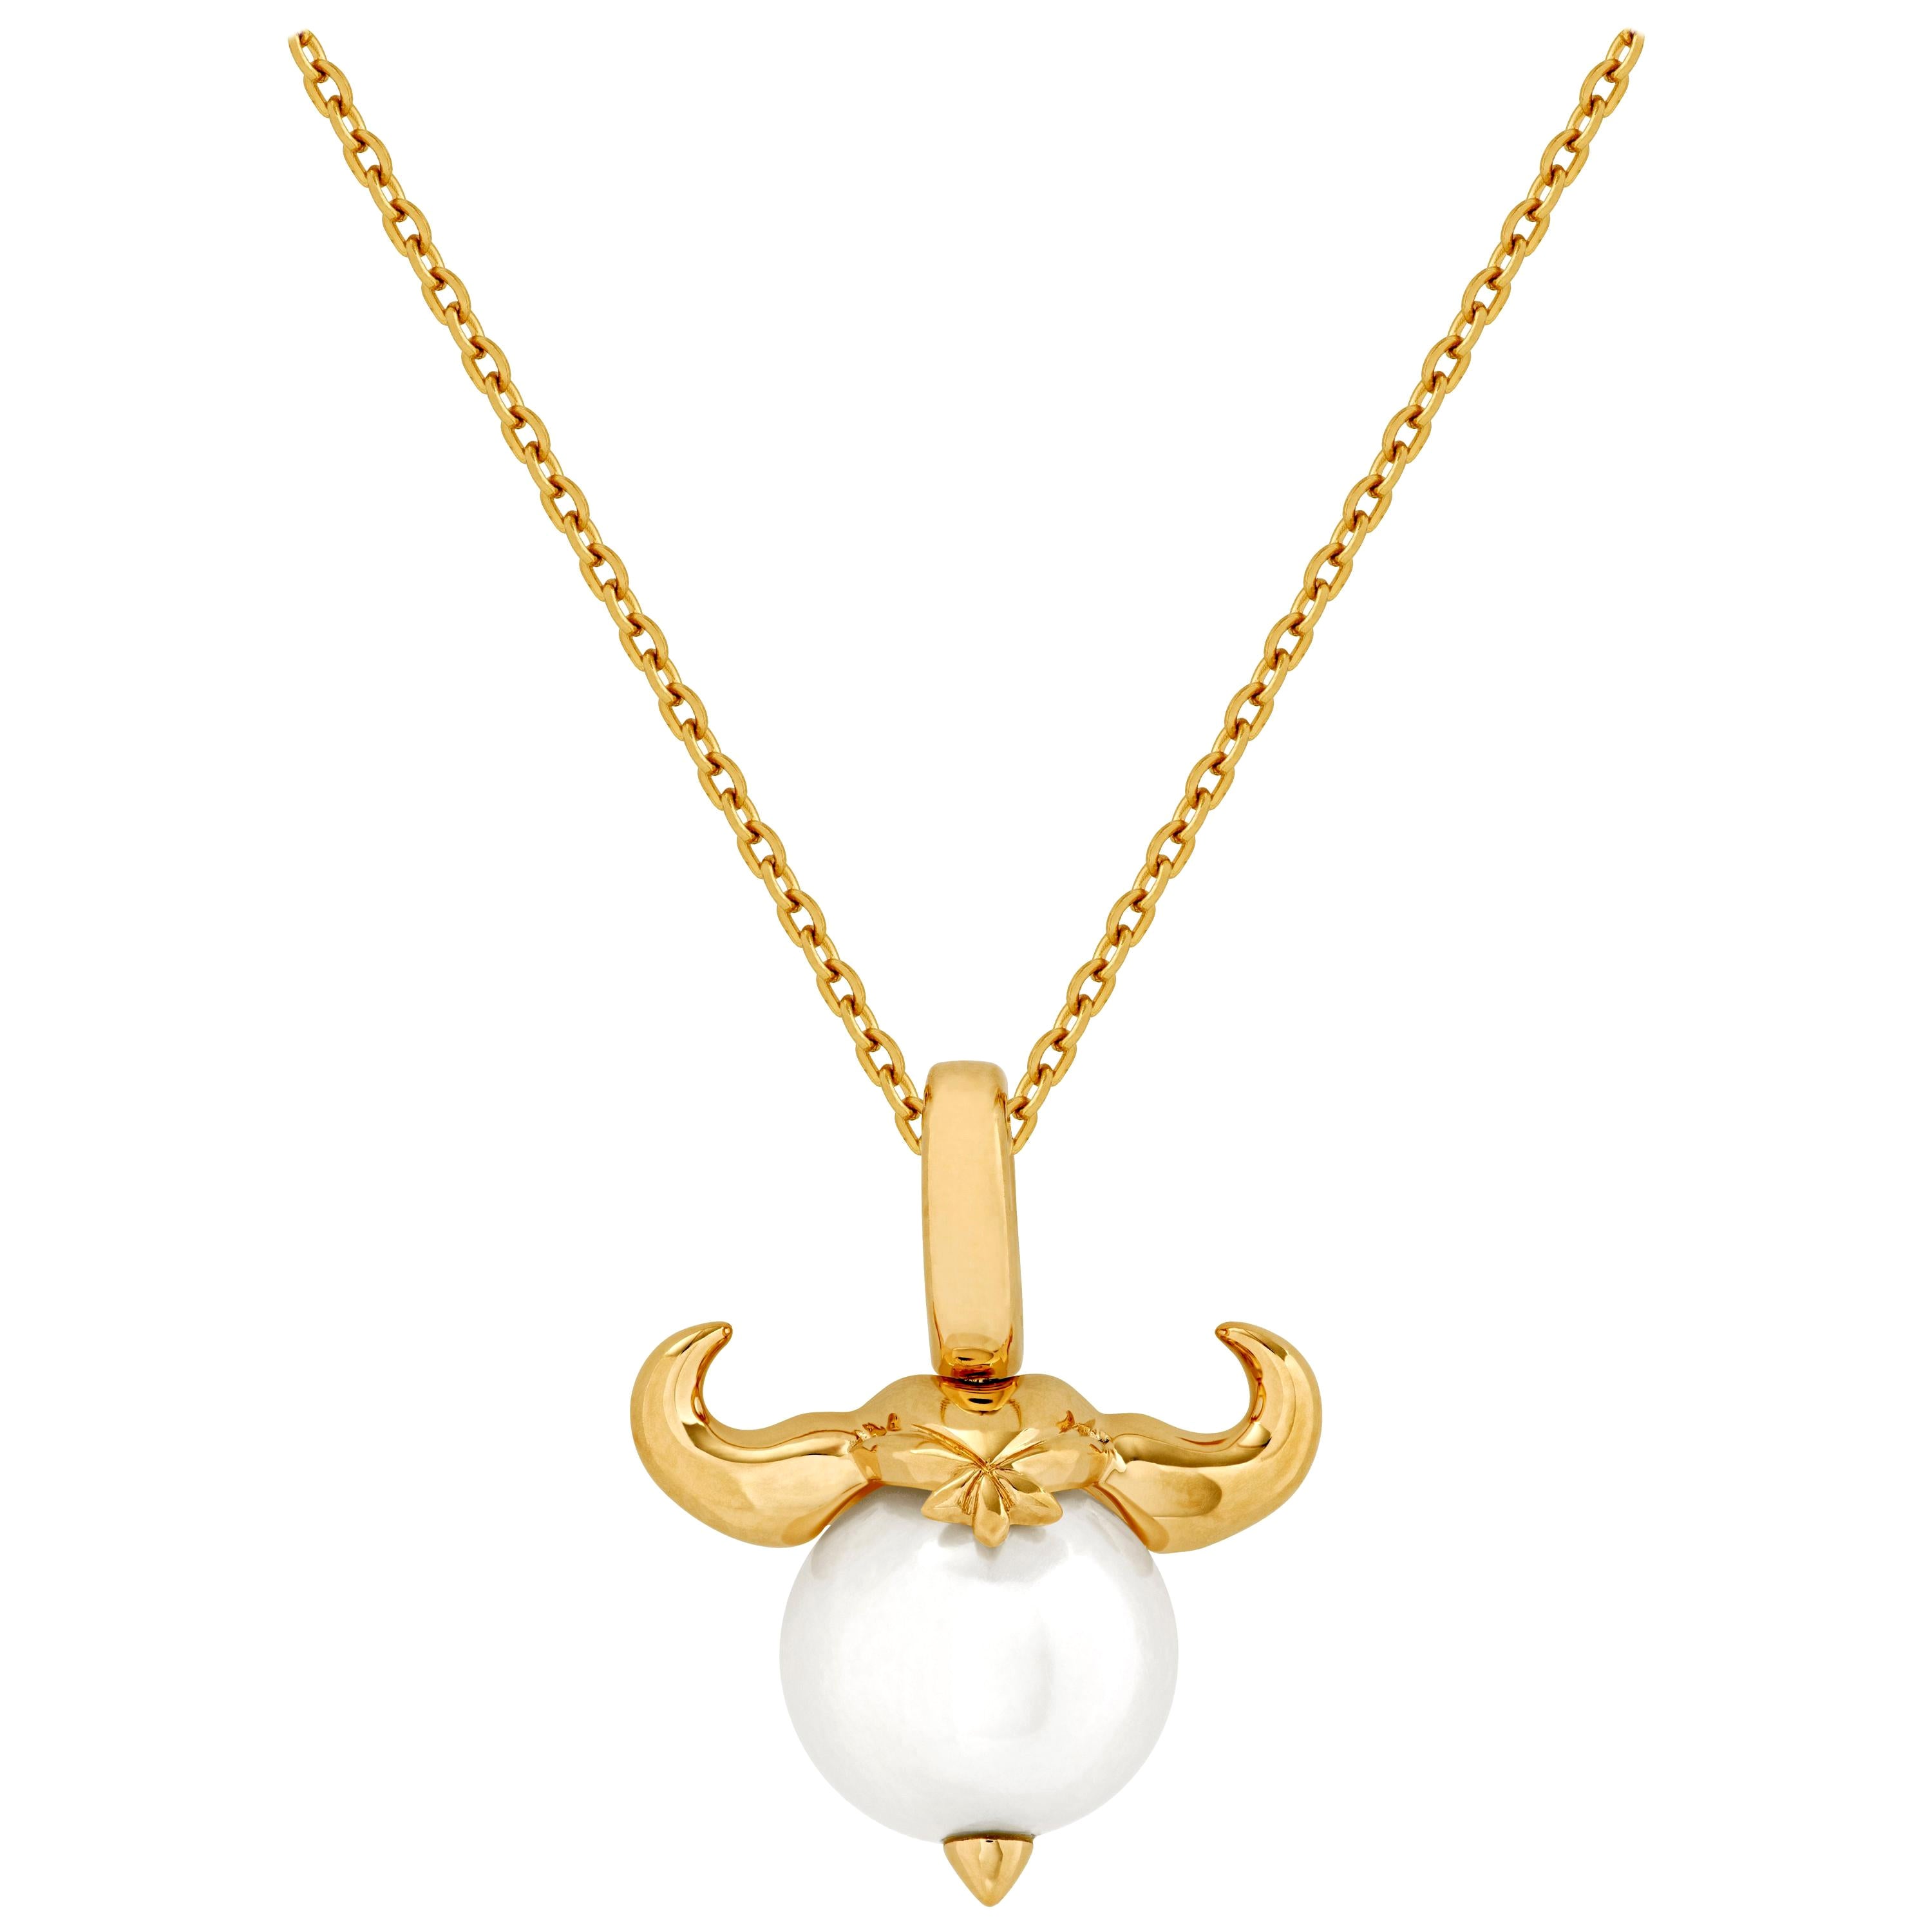 Stephen Webster Taurus Astro Ball 18ct Yellow Gold and White Pearl Pendant